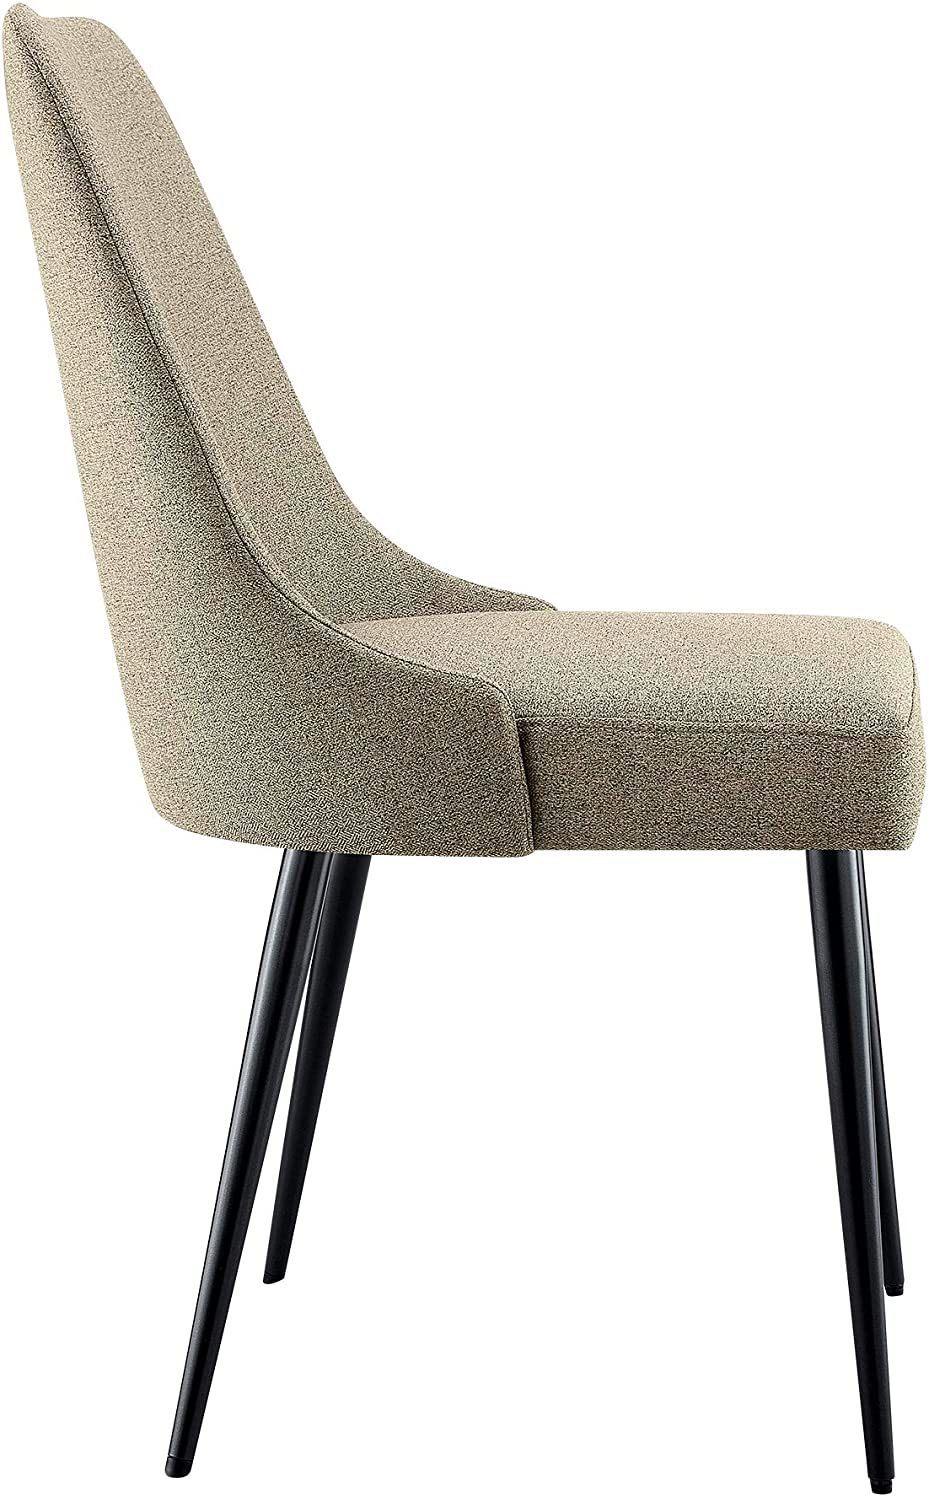 Modern Decoration Customized Furniture Hotel Cheap Leather Dining Chair with Metal Legs